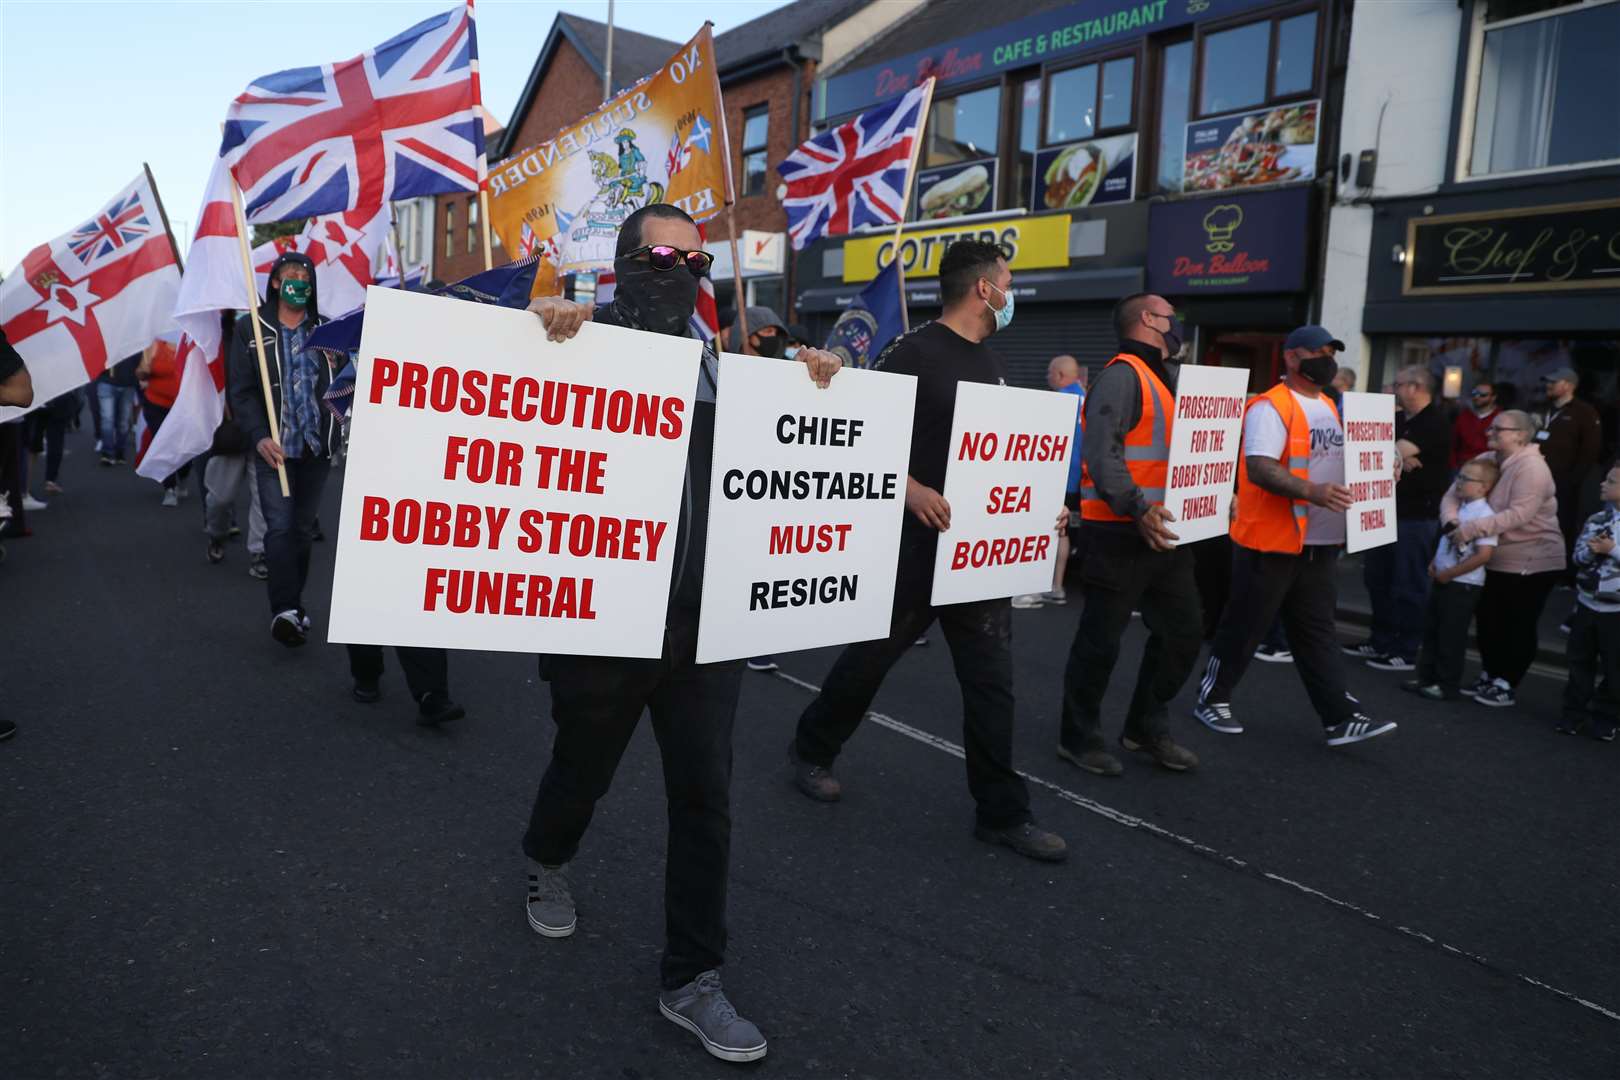 A Loyalist protest in Newtownards, County Down, against the Northern Ireland Protocol (Brian Lawless/PA)